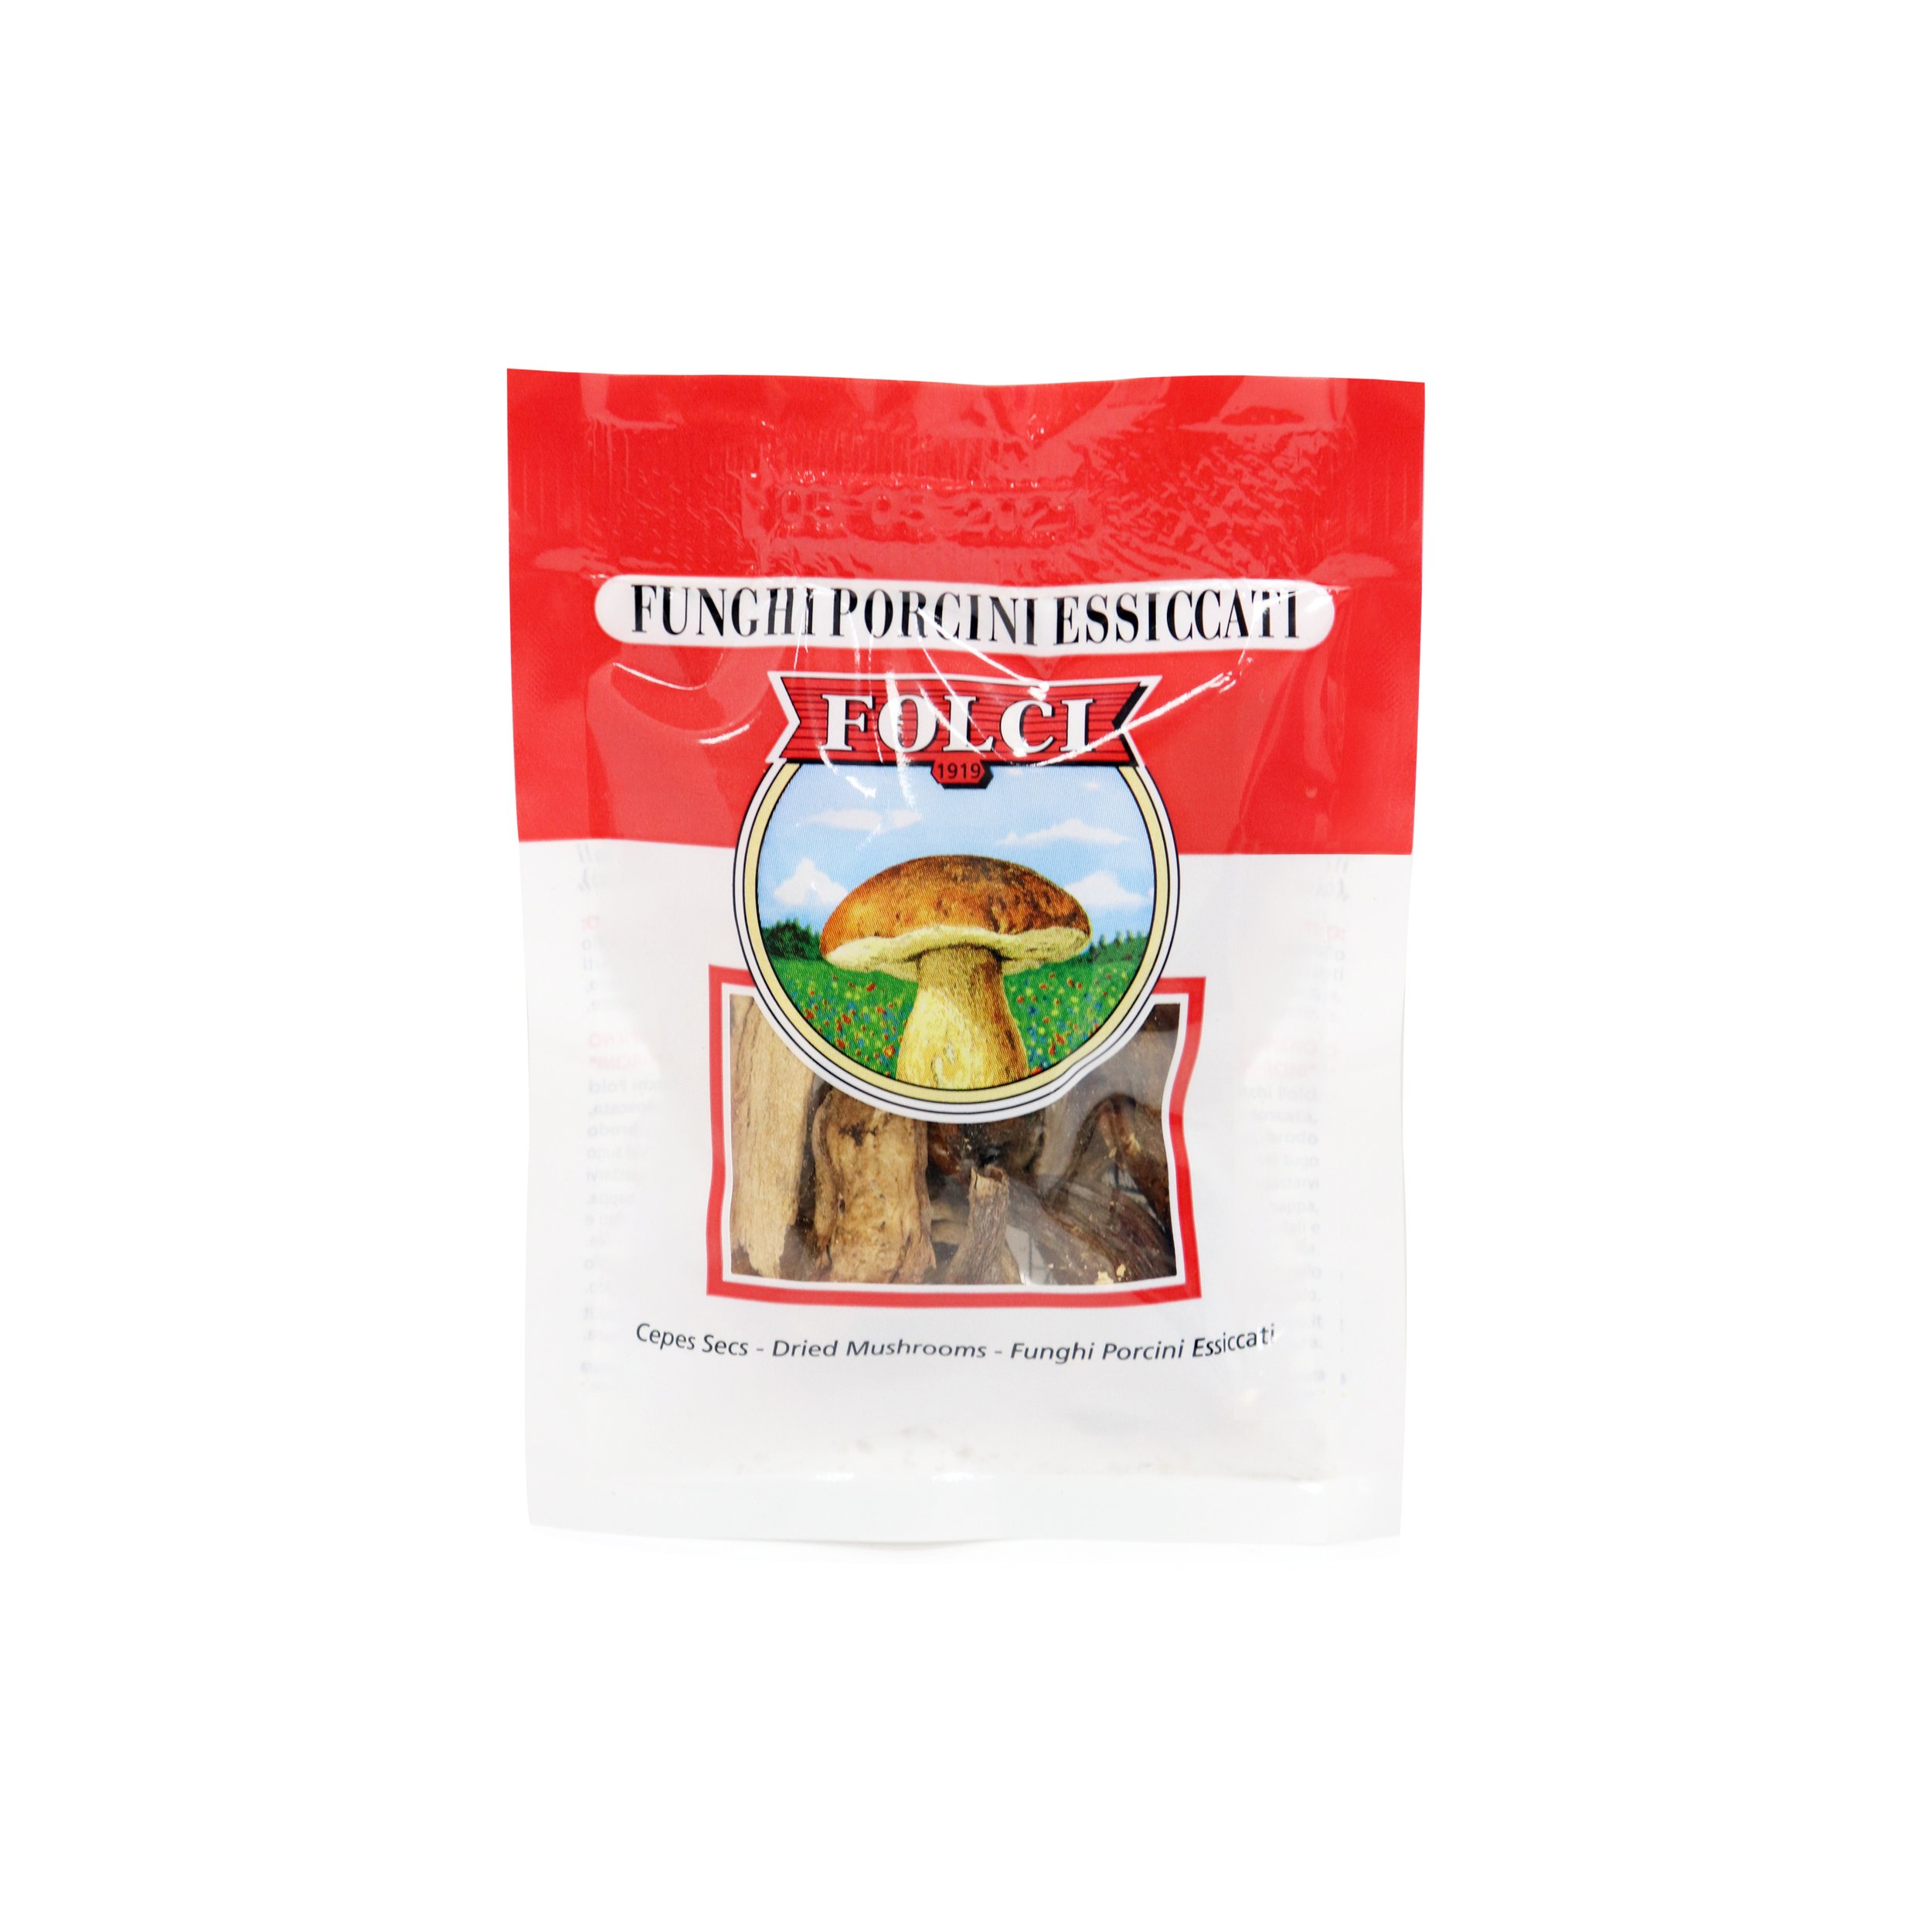 Folci products - dried porcini - 100g product shot.jpg